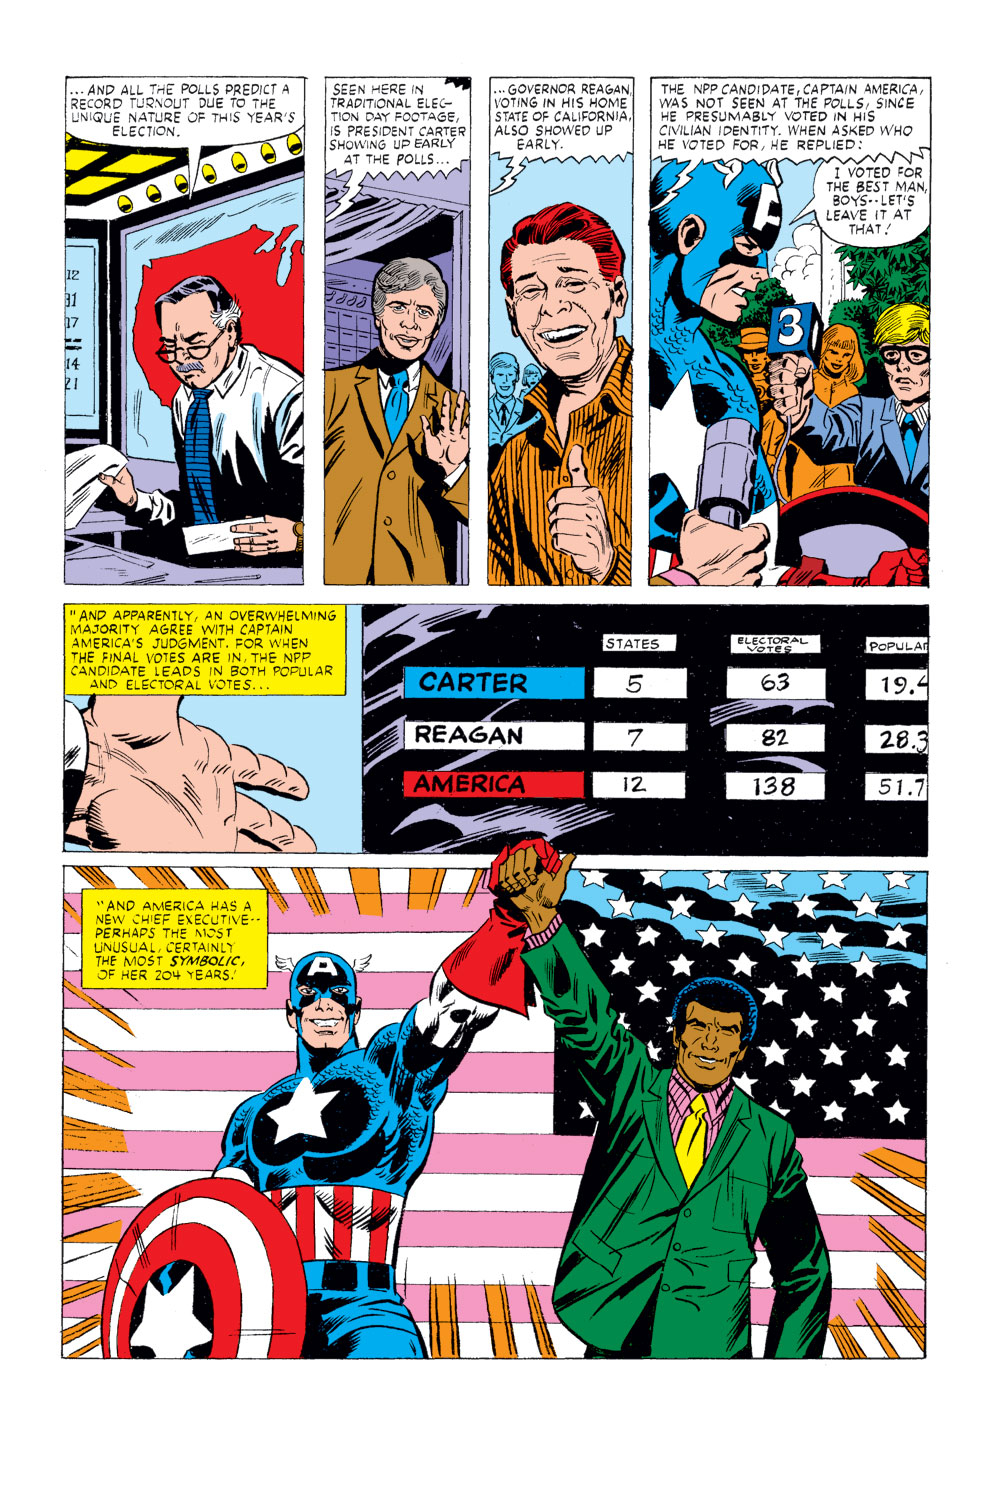 What If? (1977) issue 26 - Captain America had been elected president - Page 9